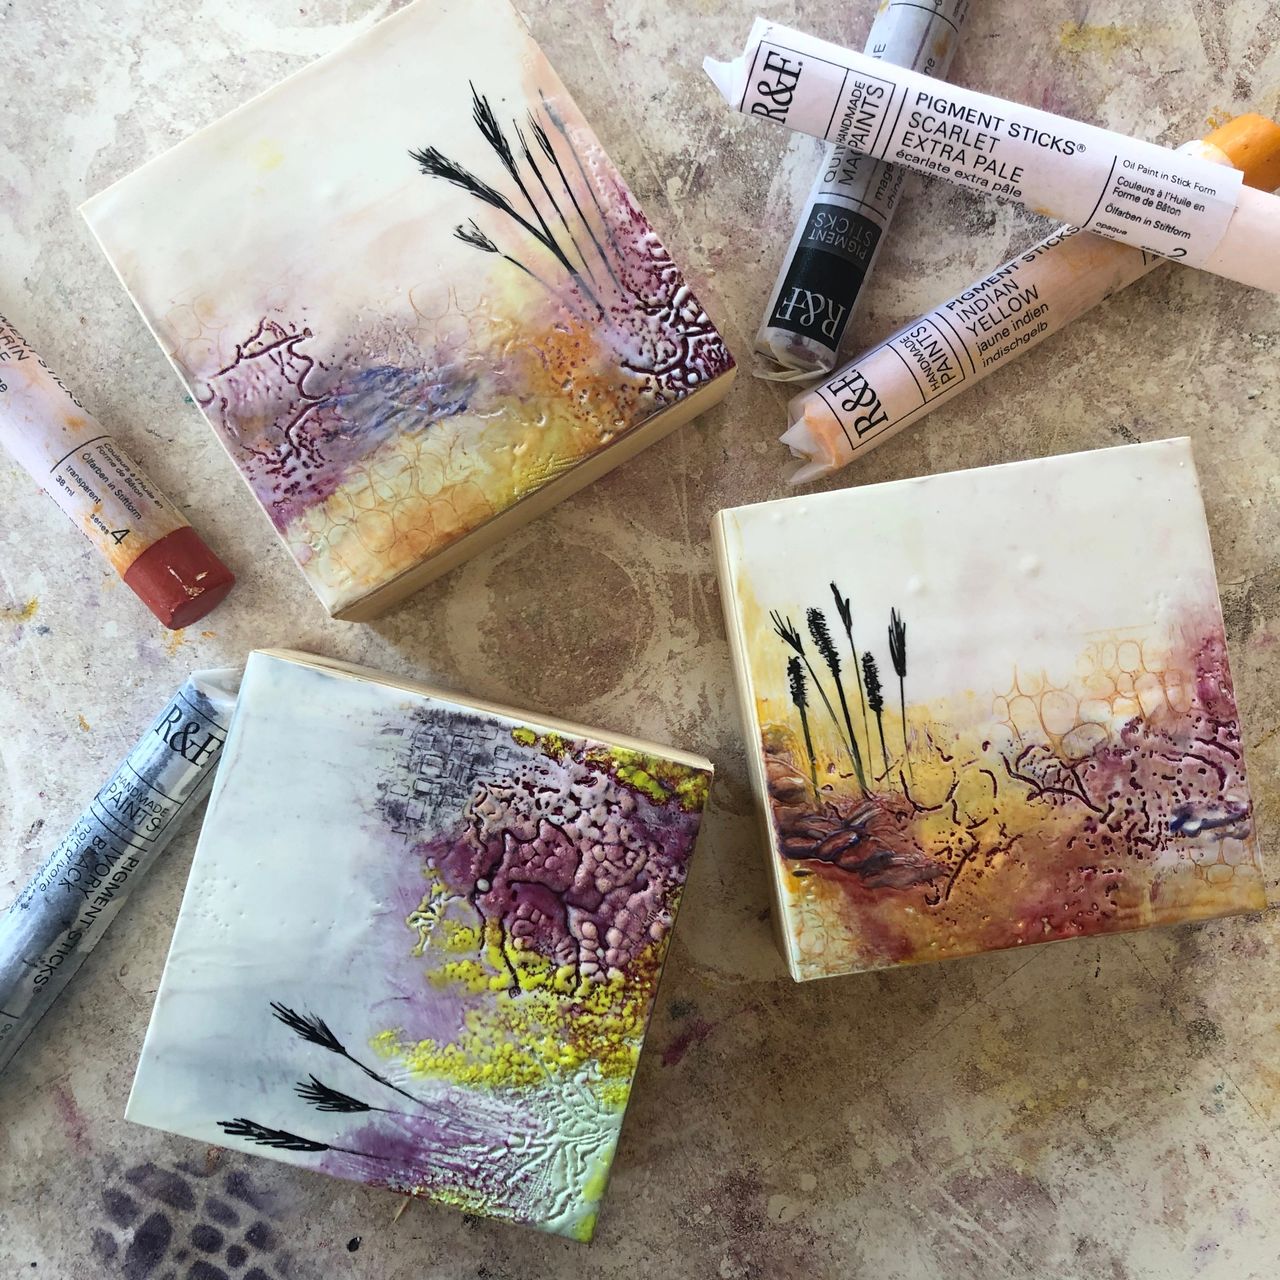 3 New Encaustic Supplies That I Already Can't Live Without!